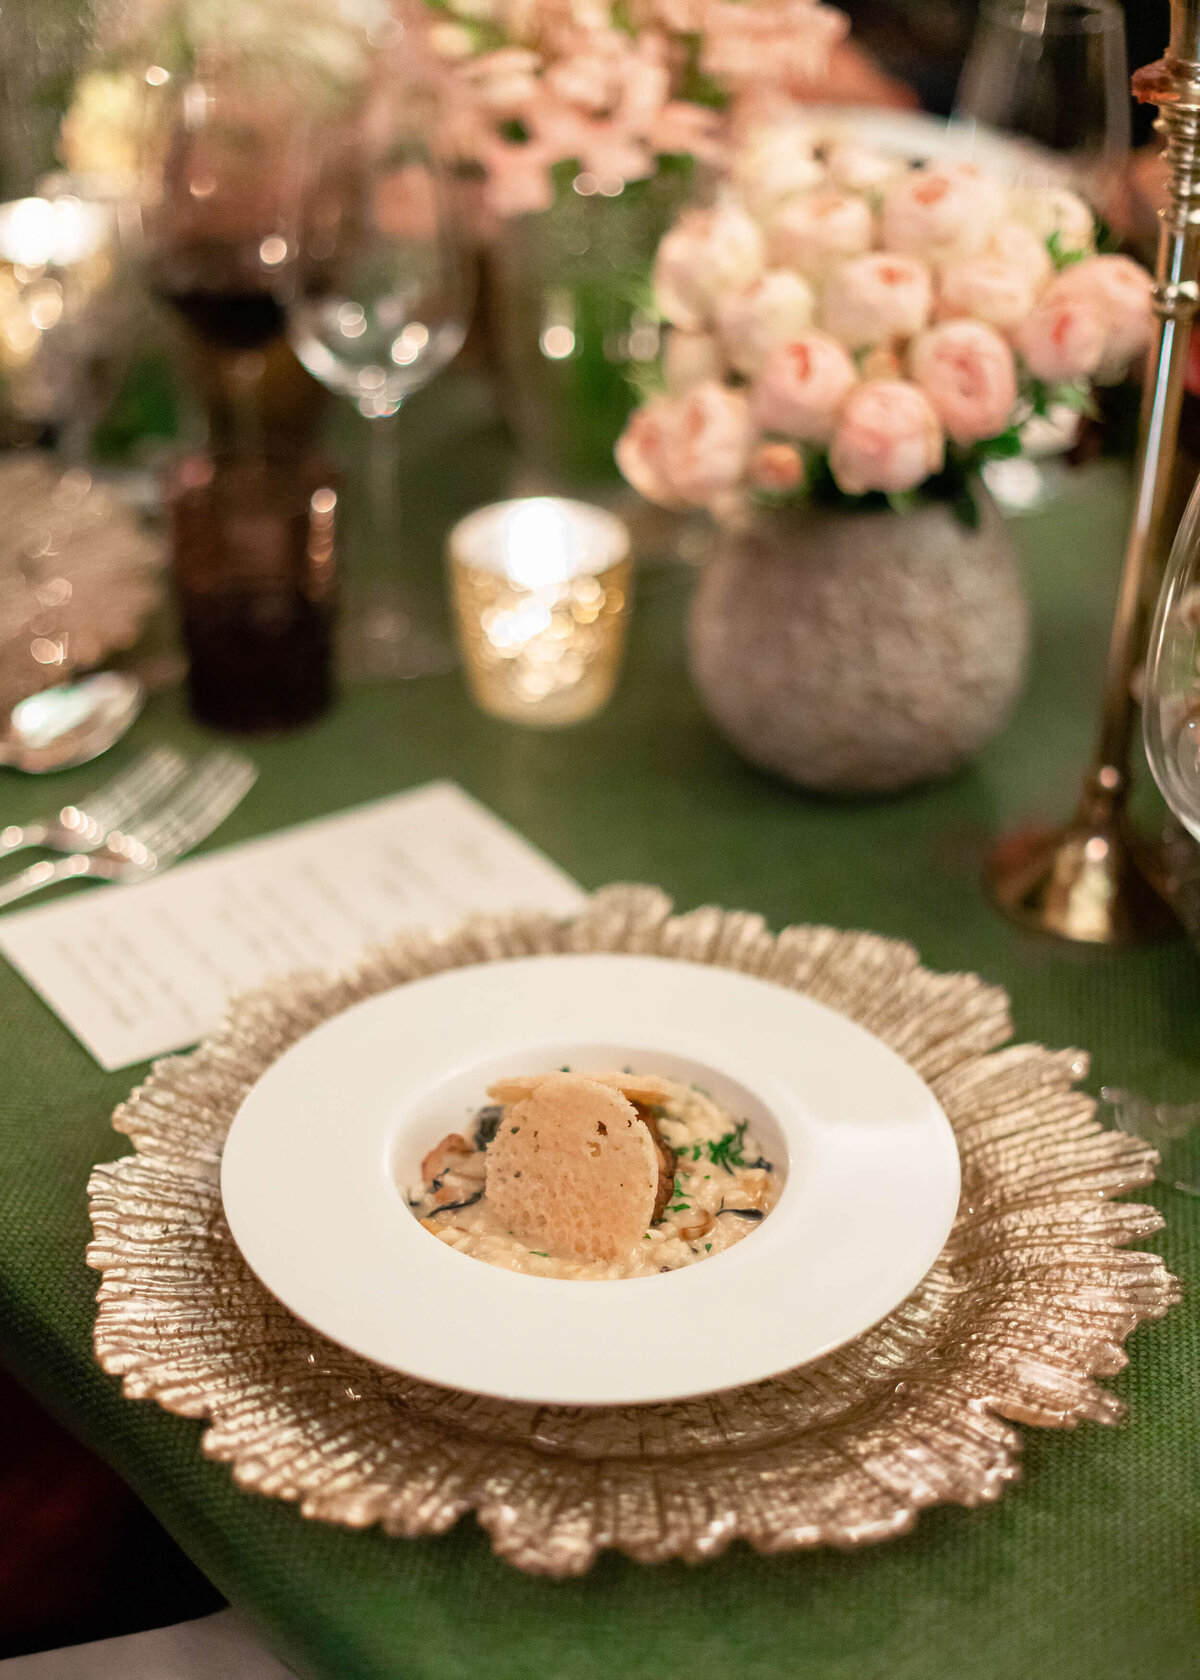 chloe-winstanley-events-gsp-wildabout-main-course